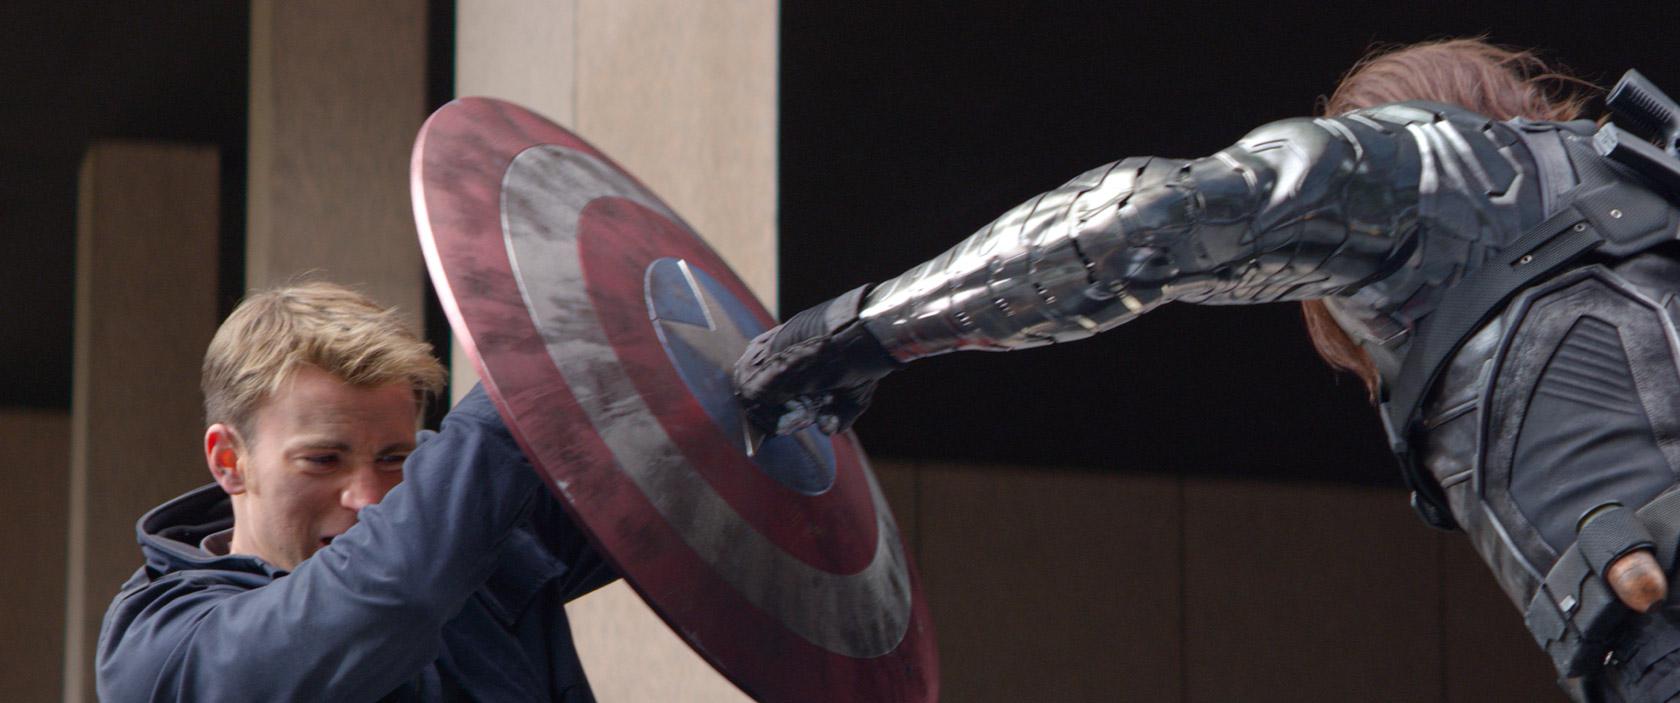 Captain-America-The-Winter-Soldier-Official-Photo-Bucky-punching-Shield.jpg